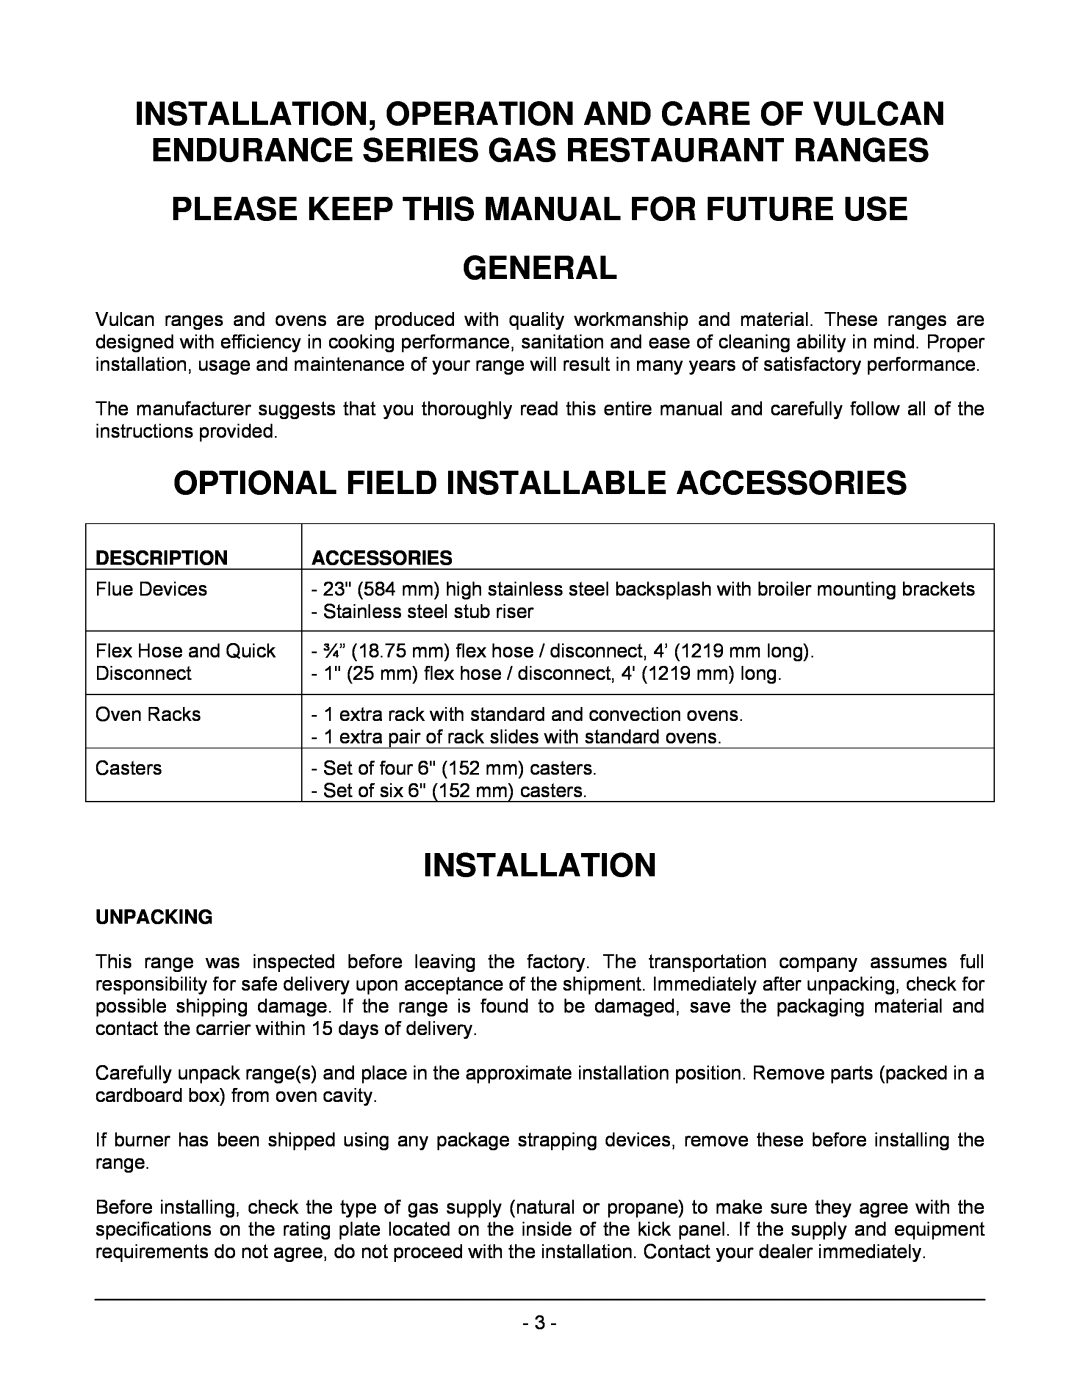 Vulcan-Hart 24S Please Keep This Manual For Future Use General, Optional Field Installable Accessories, Installation 